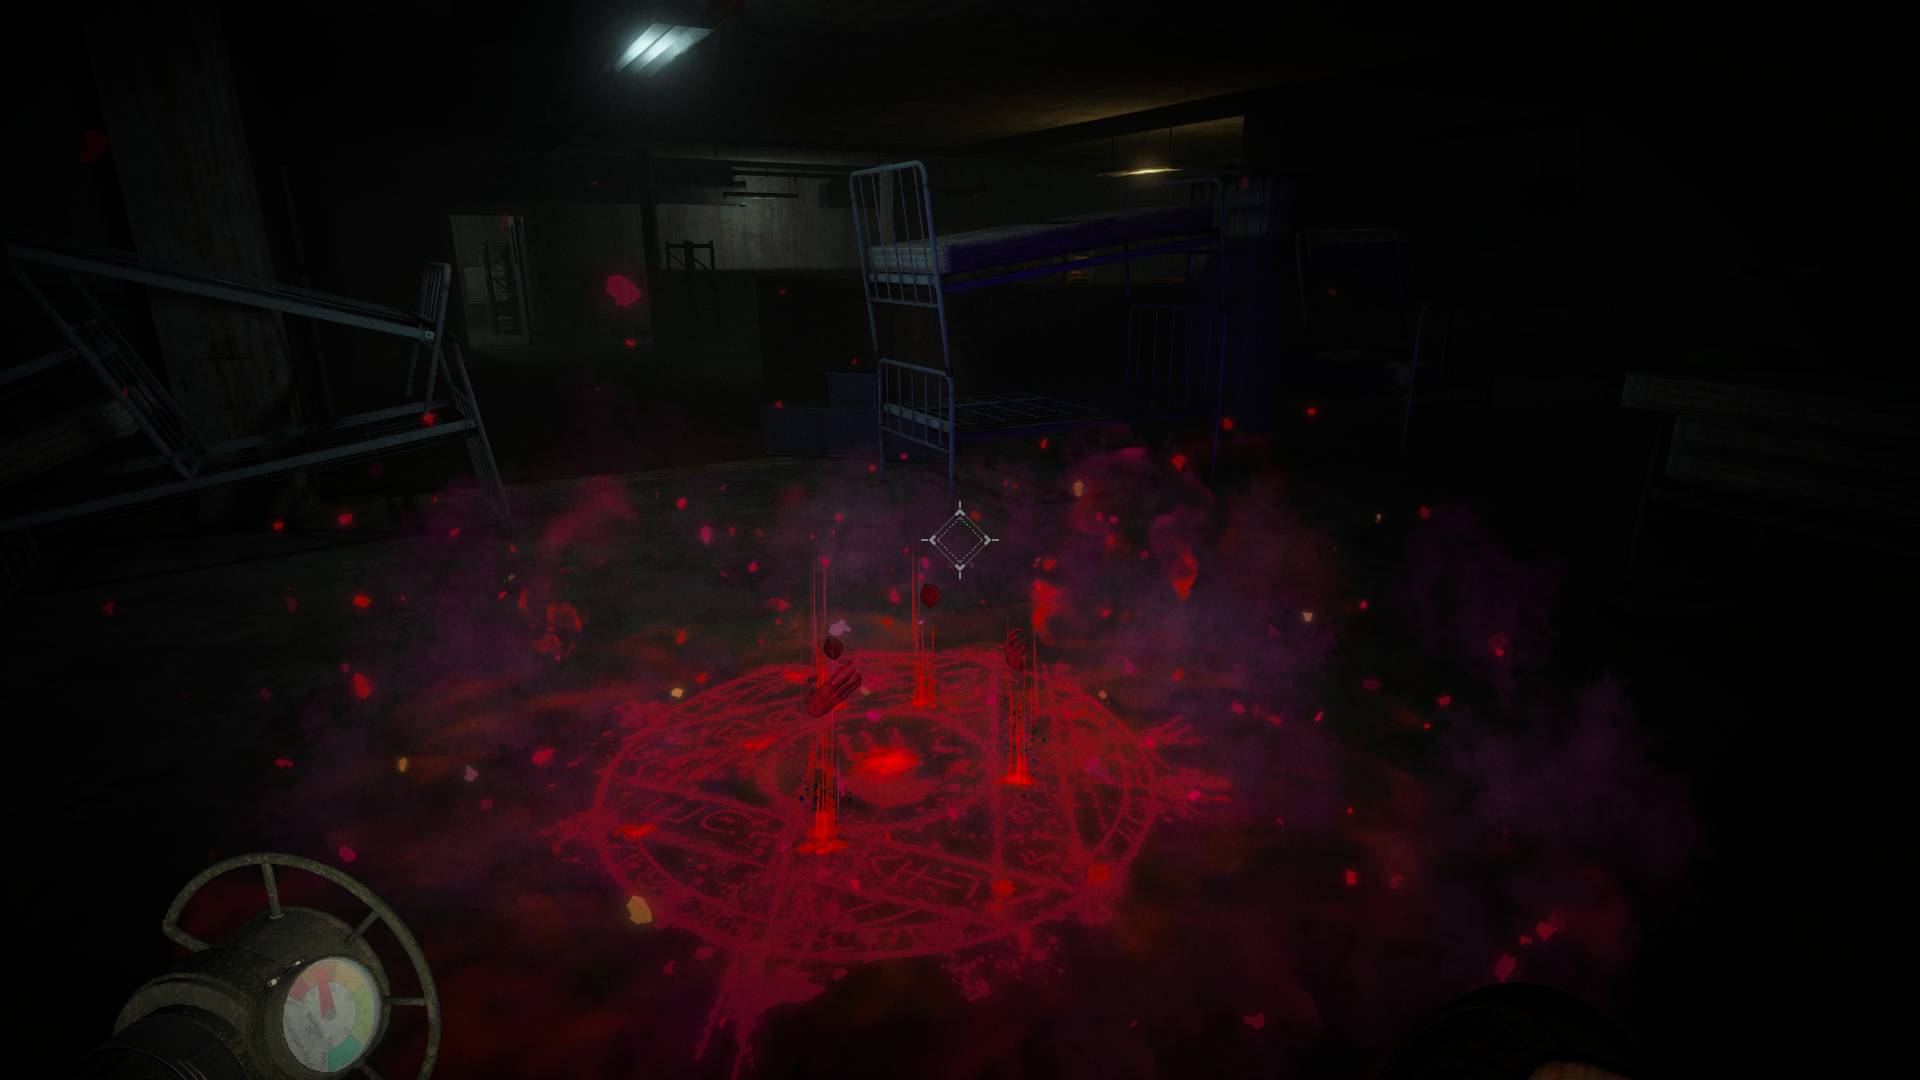 Screenshot of the game. In an abandoned bunkroom, a demonic summoning circle is scrawled on the floor in blood.